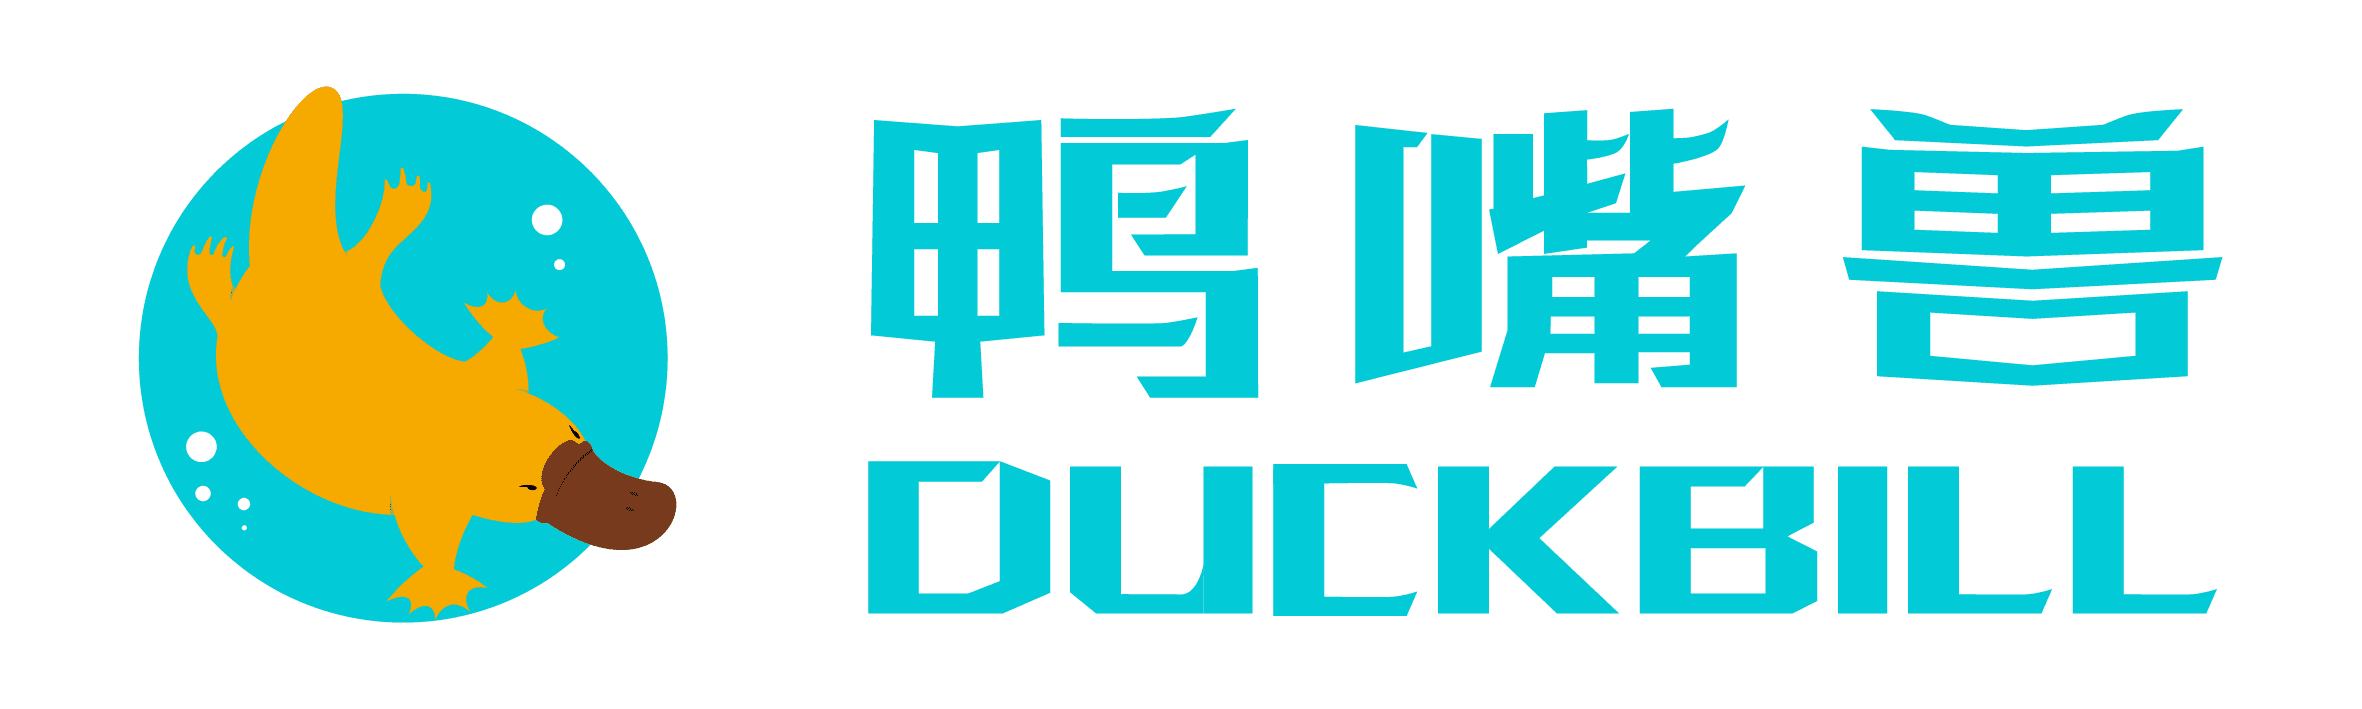 Latest Duckbill Digital Supply Chain Management Ho Chi Minh Company Limited (Dscm HCM) employment/hiring with high salary & attractive benefits